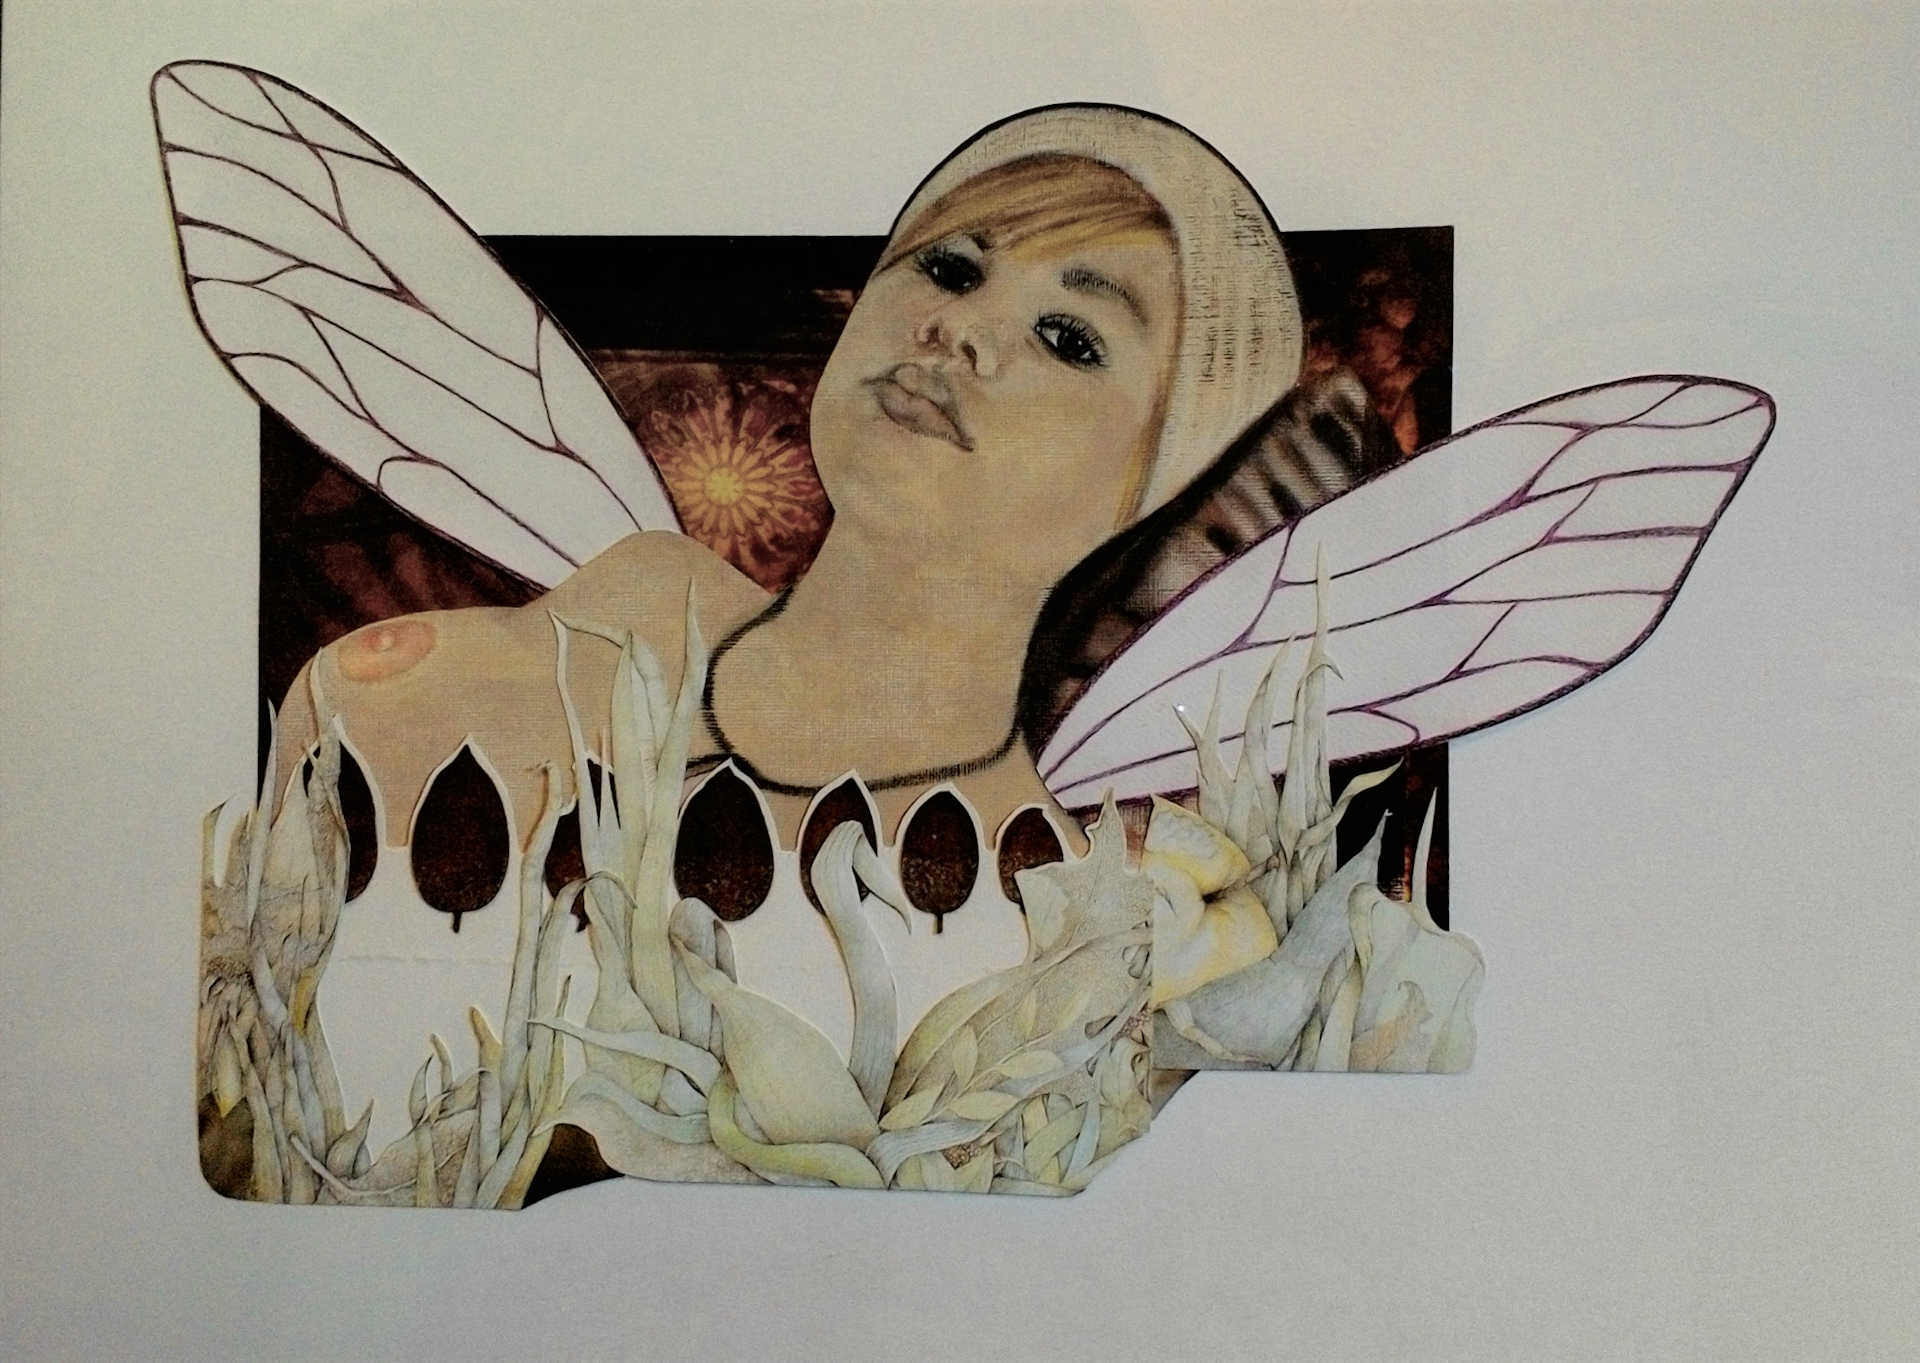 Collage work 'Connection' by Libby Bloxham. A nude portrait of a reclining woman is layered under countour-cut pencil drawings and inked imprints of leaves, fruits and other botanical elements. Contour-cute insect wings have been placed at her shoulders.